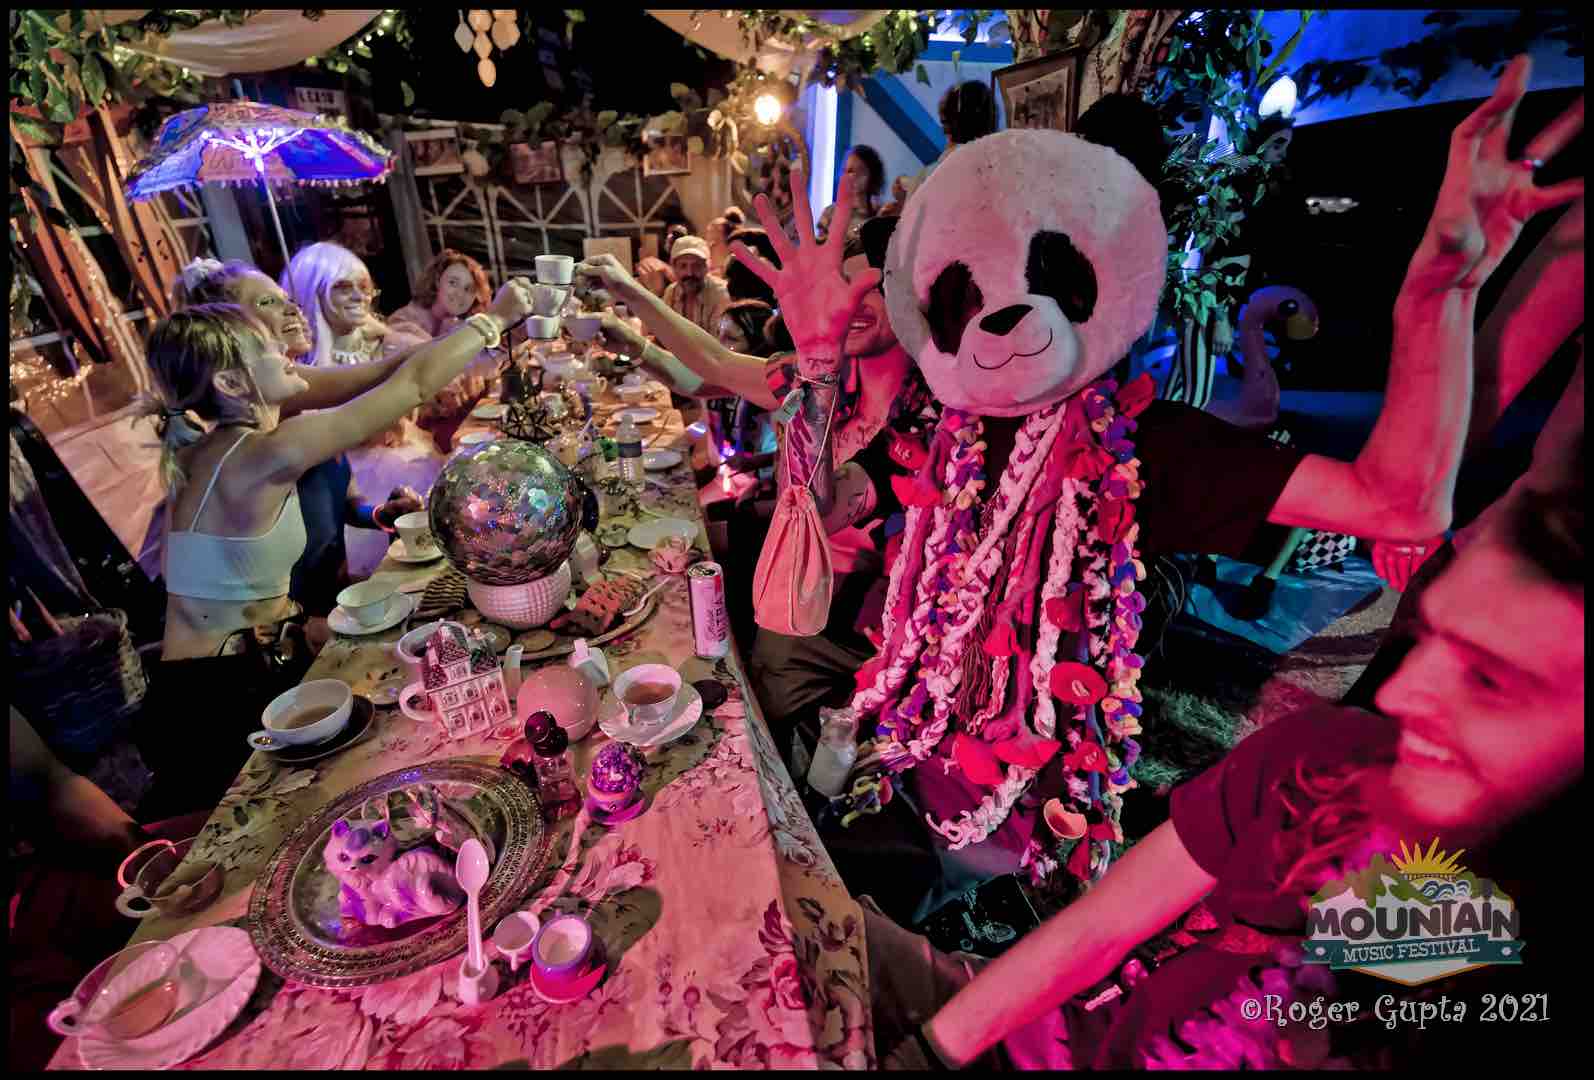 party people in the mad tea party at mountain music festival 2021 with panda mask